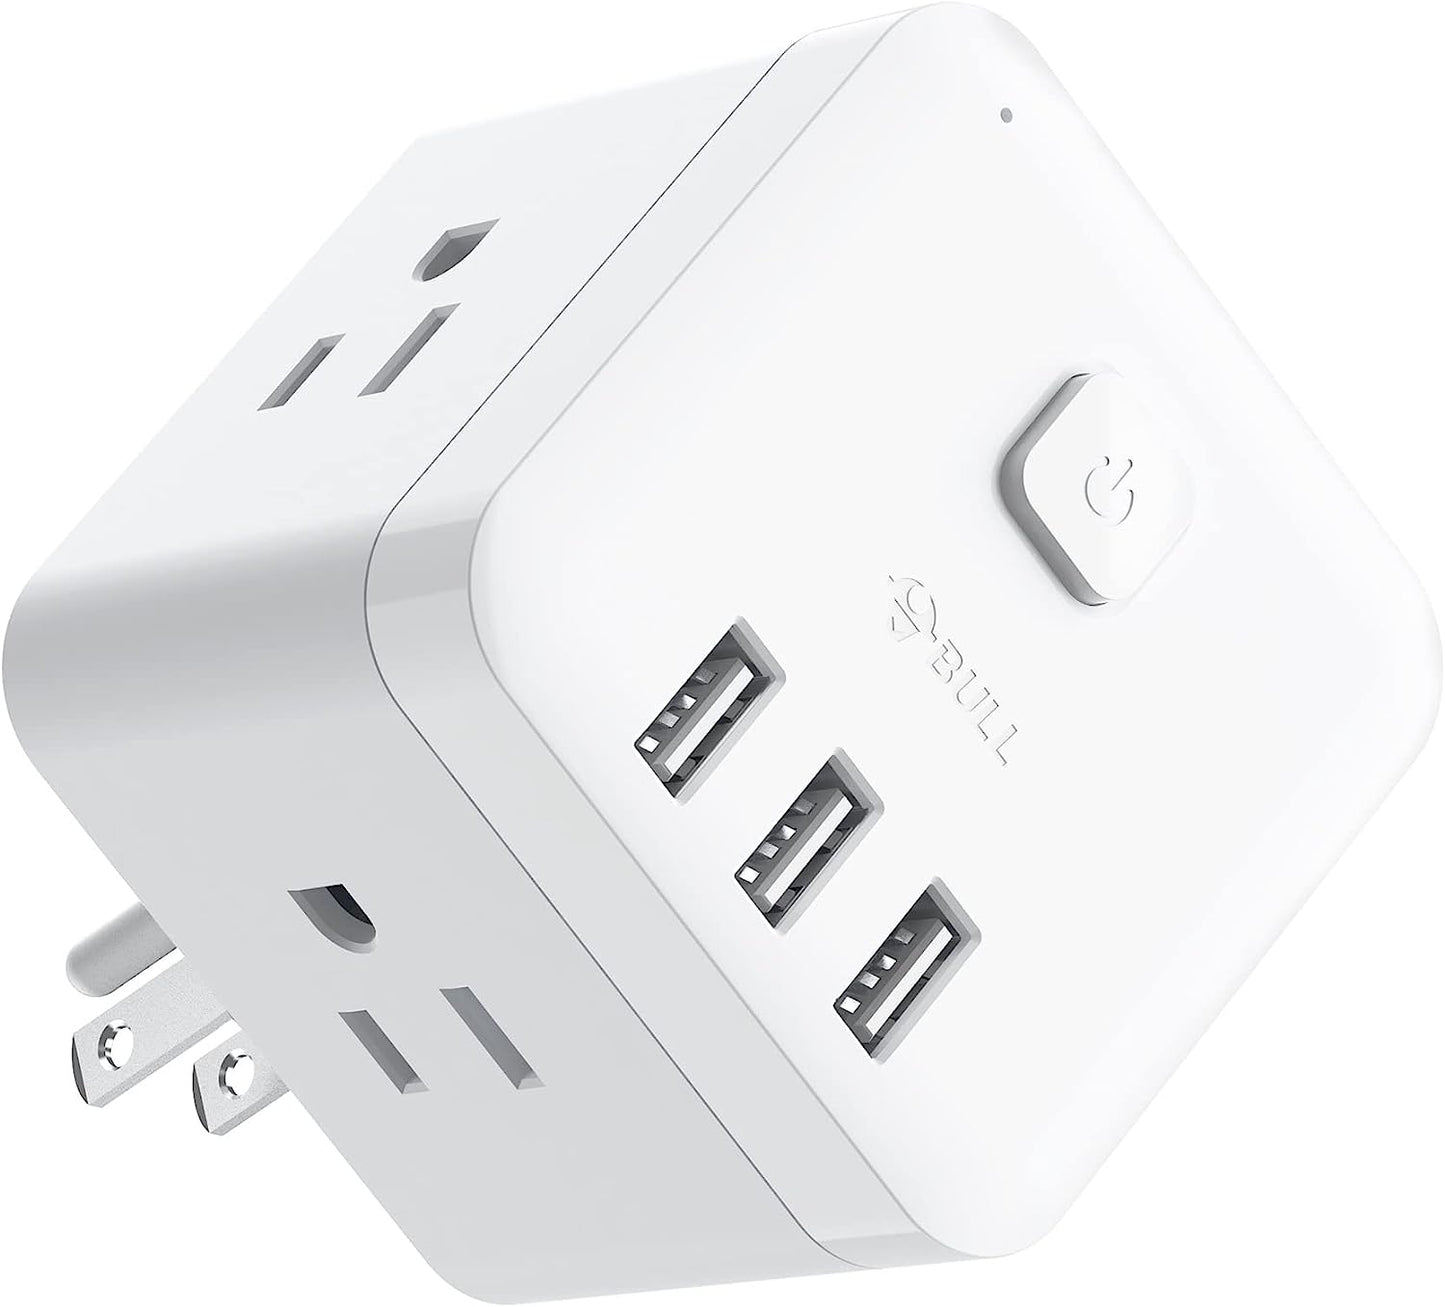 GONEO Surge Protector, Wall Plug Outlet Extender with 3 AC Outlets and 3 USB Ports, 200 Joules, ETL Listed, Compact Multi Plug Outlet USB Wall Charger for Home, Dorm, Travel, Office, Hotel